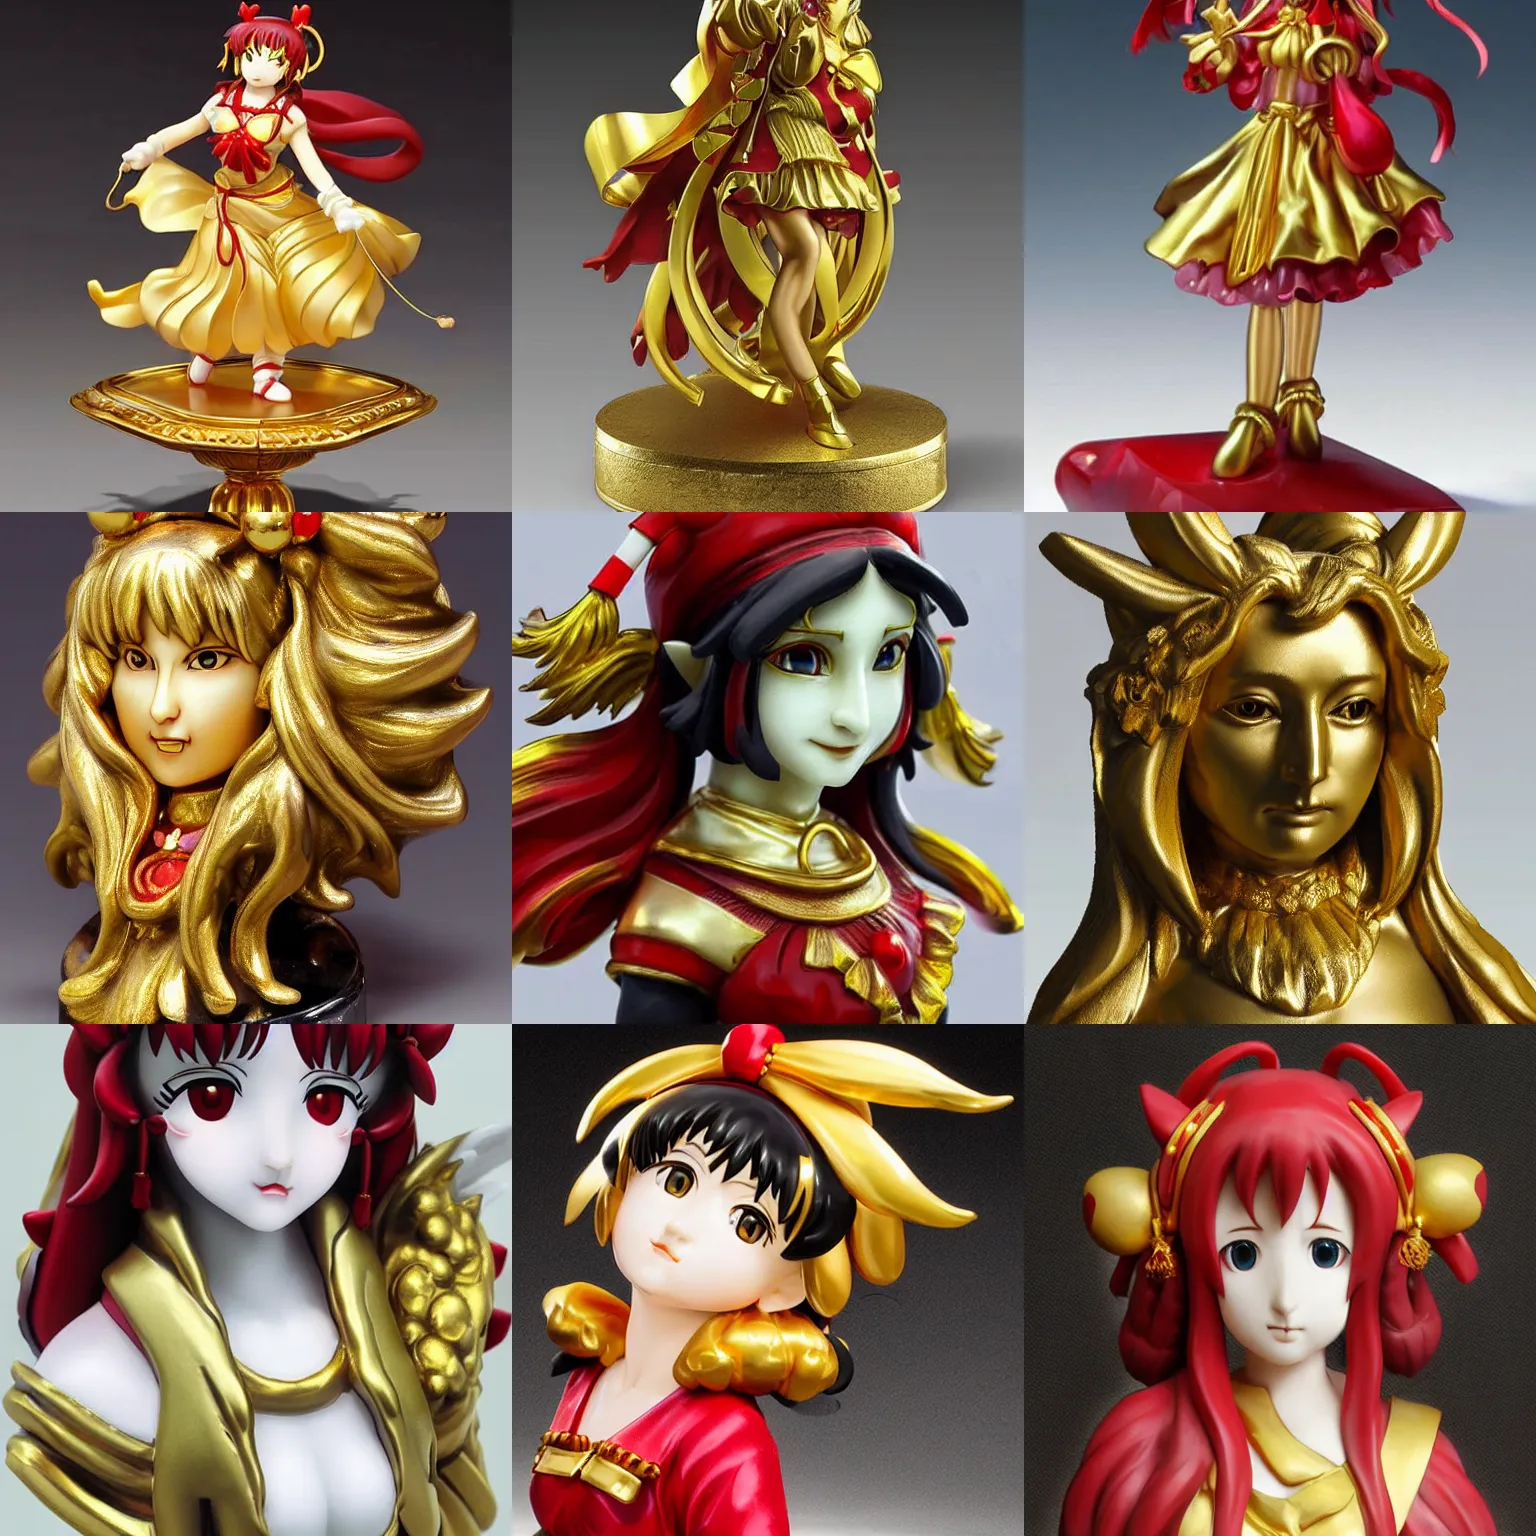 Prompt: a gold marble sculpture of reimu hakurei, masterpiece, ultra realistic, hyperrealistic, extreme details